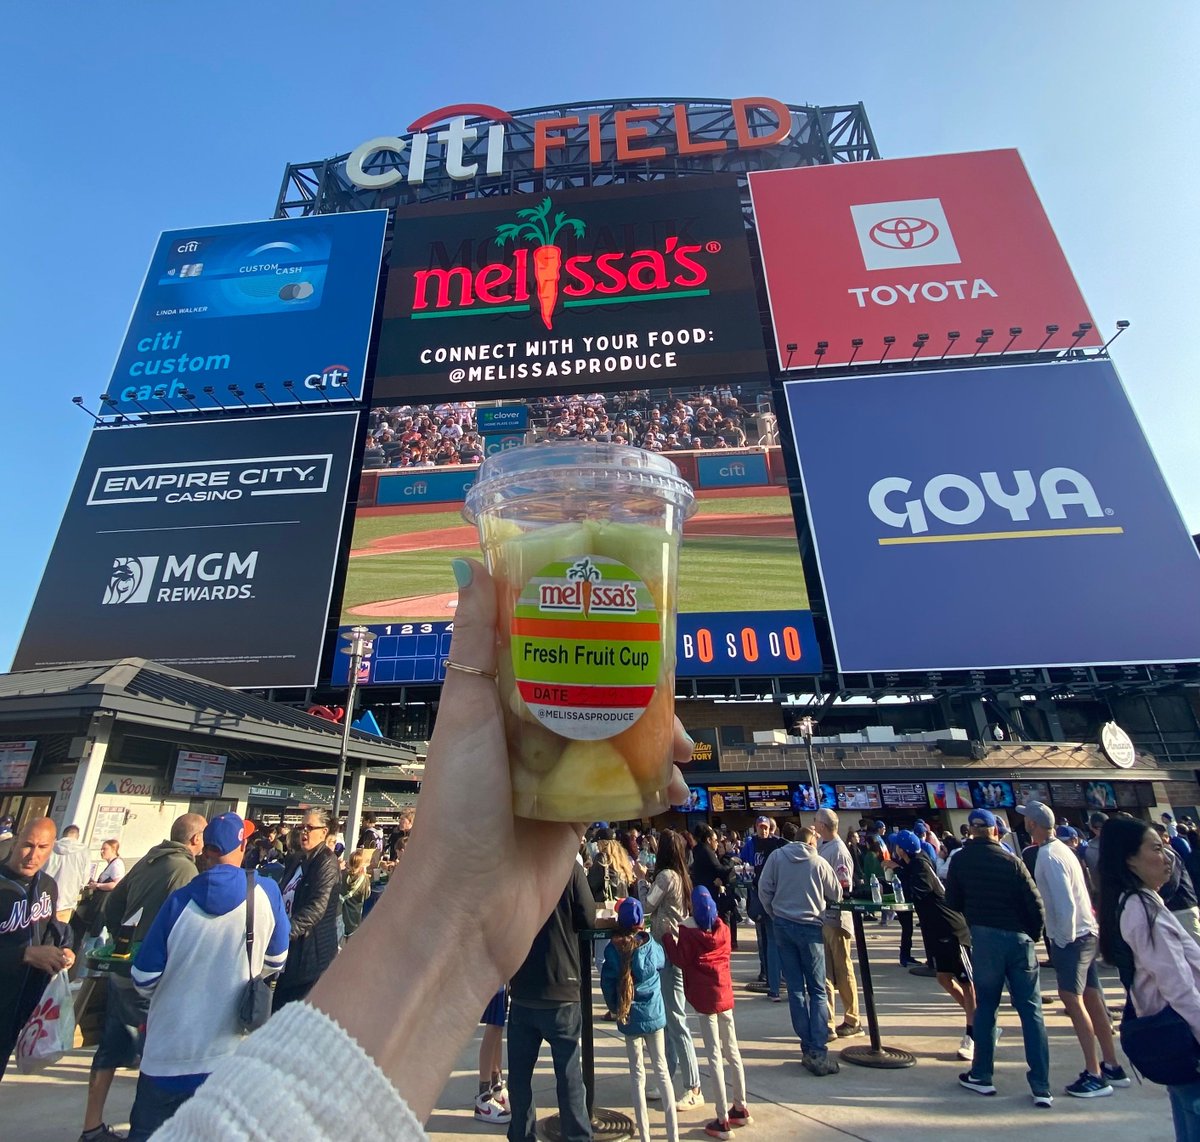 Doesn't get much better than this! 🏟️ @Citifield ⚾️ @Mets vs @Braves 🍉🍍 Fresh Fruit Cup #MelissasProduce #StadiumFood #HealthyOptions #LGM